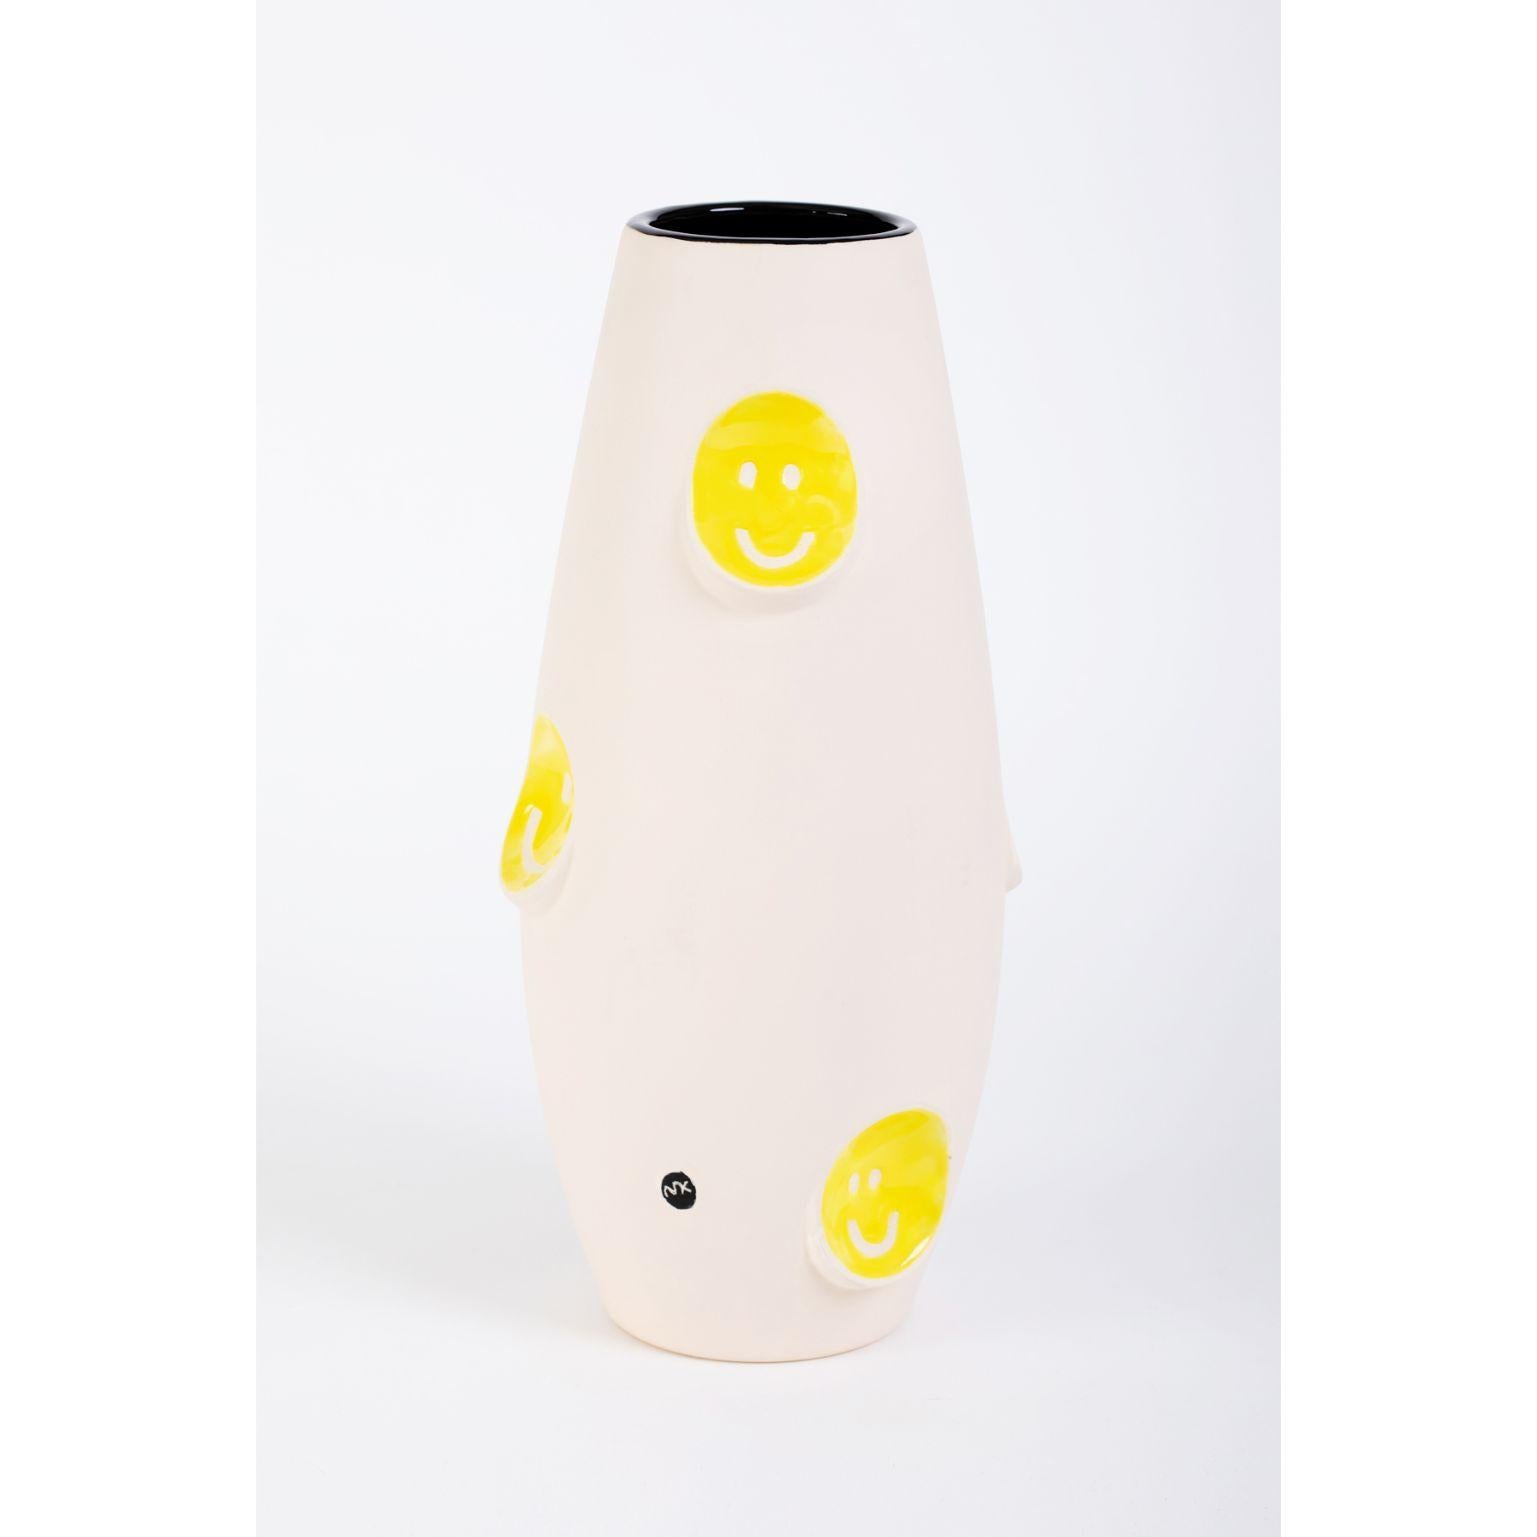 Oko Pop ceramic vase - Smiley by Malwina Konopacka
Unique Sculpture ( Decorated and hand painted by the artist )
Materials: Impregnated ceramics, glazed interior, sgraffito yellow glaze, overglaze painting
Dimensions: D19, D42 cm.

Also